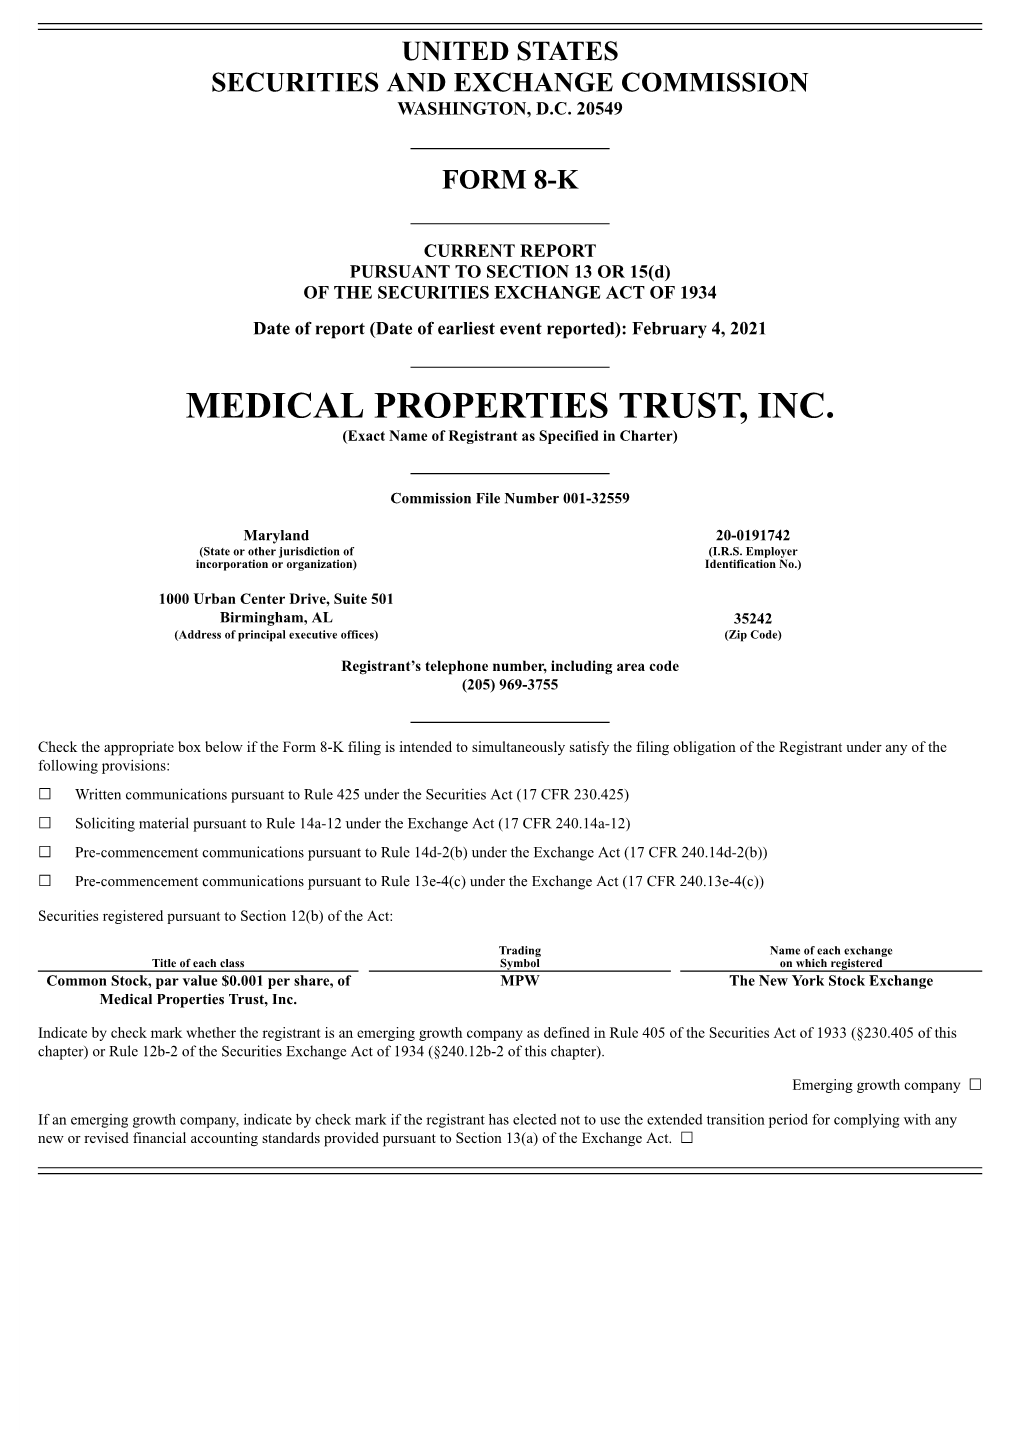 MEDICAL PROPERTIES TRUST, INC. (Exact Name of Registrant As Specified in Charter)